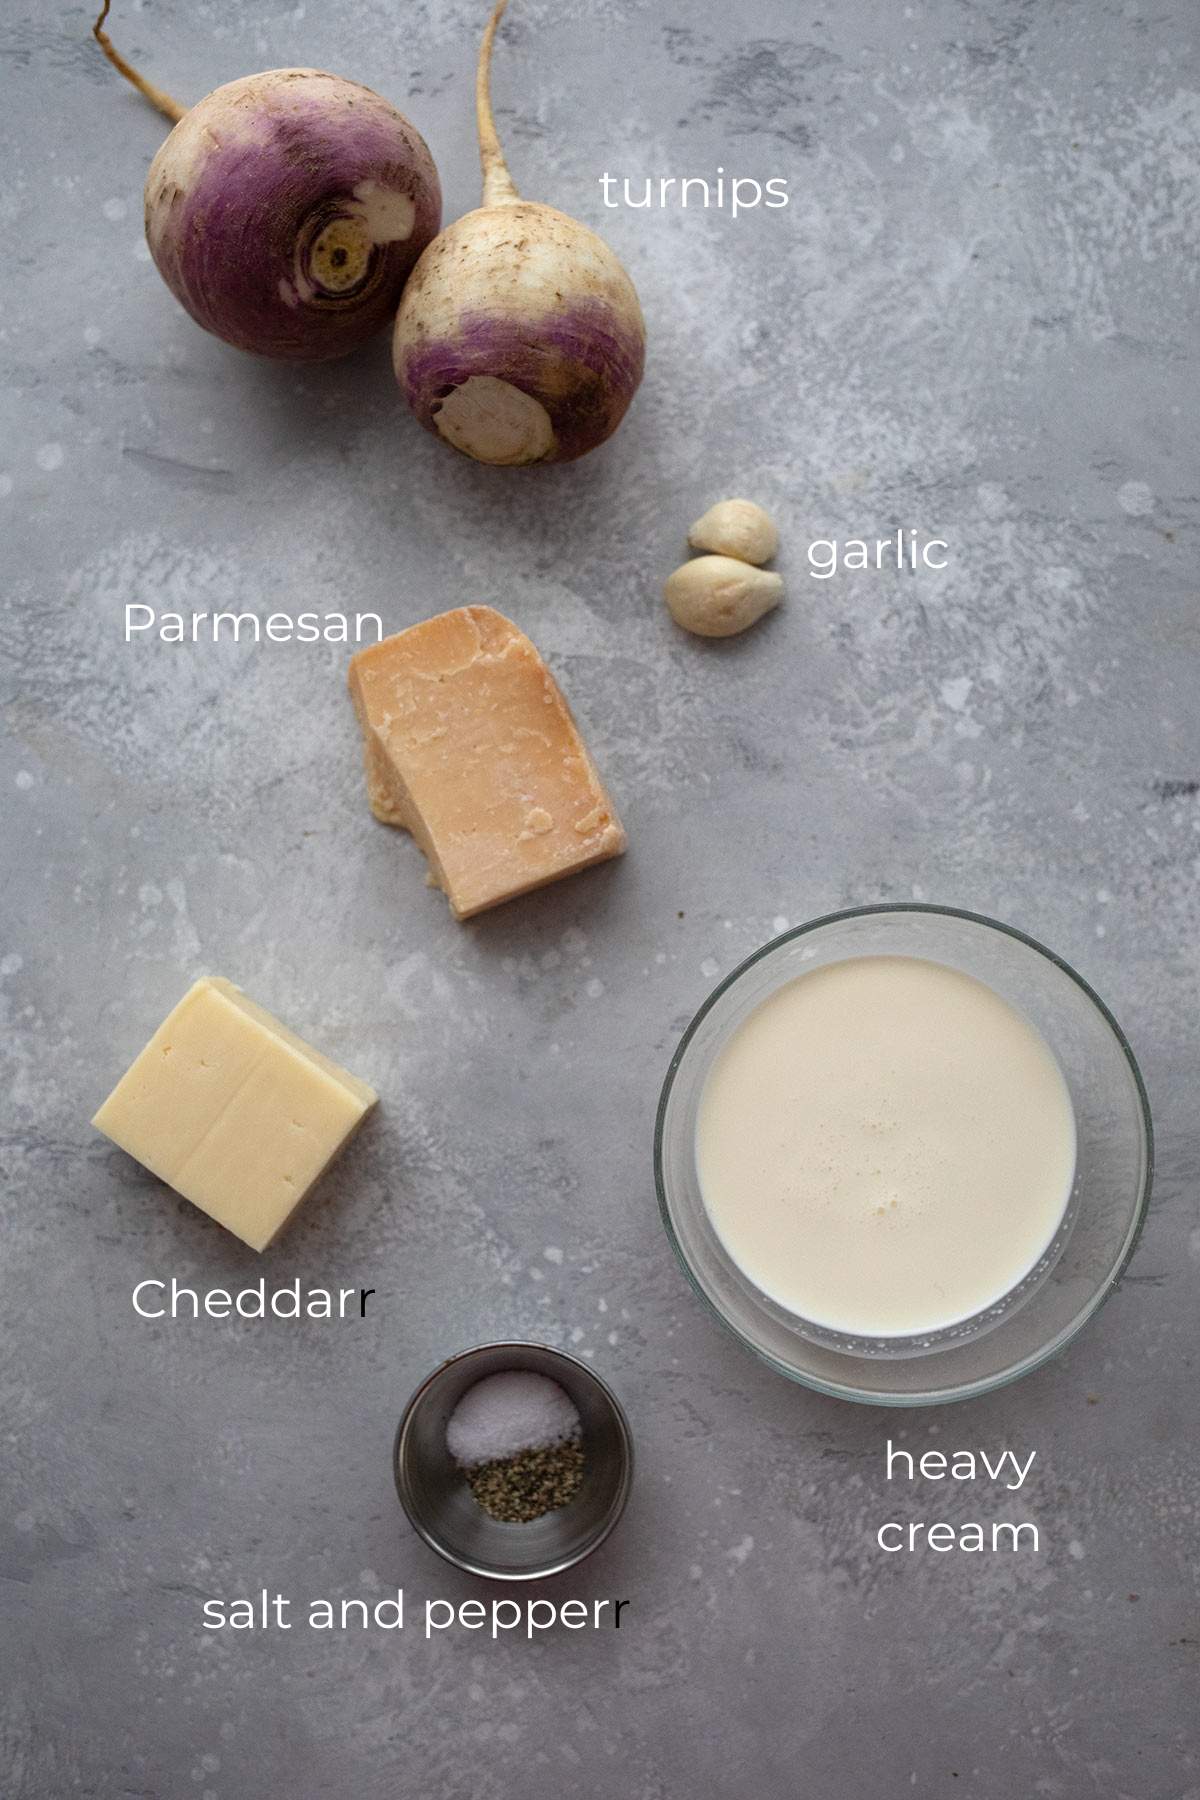 Top down image of the ingredients for Turnip au Gratin.